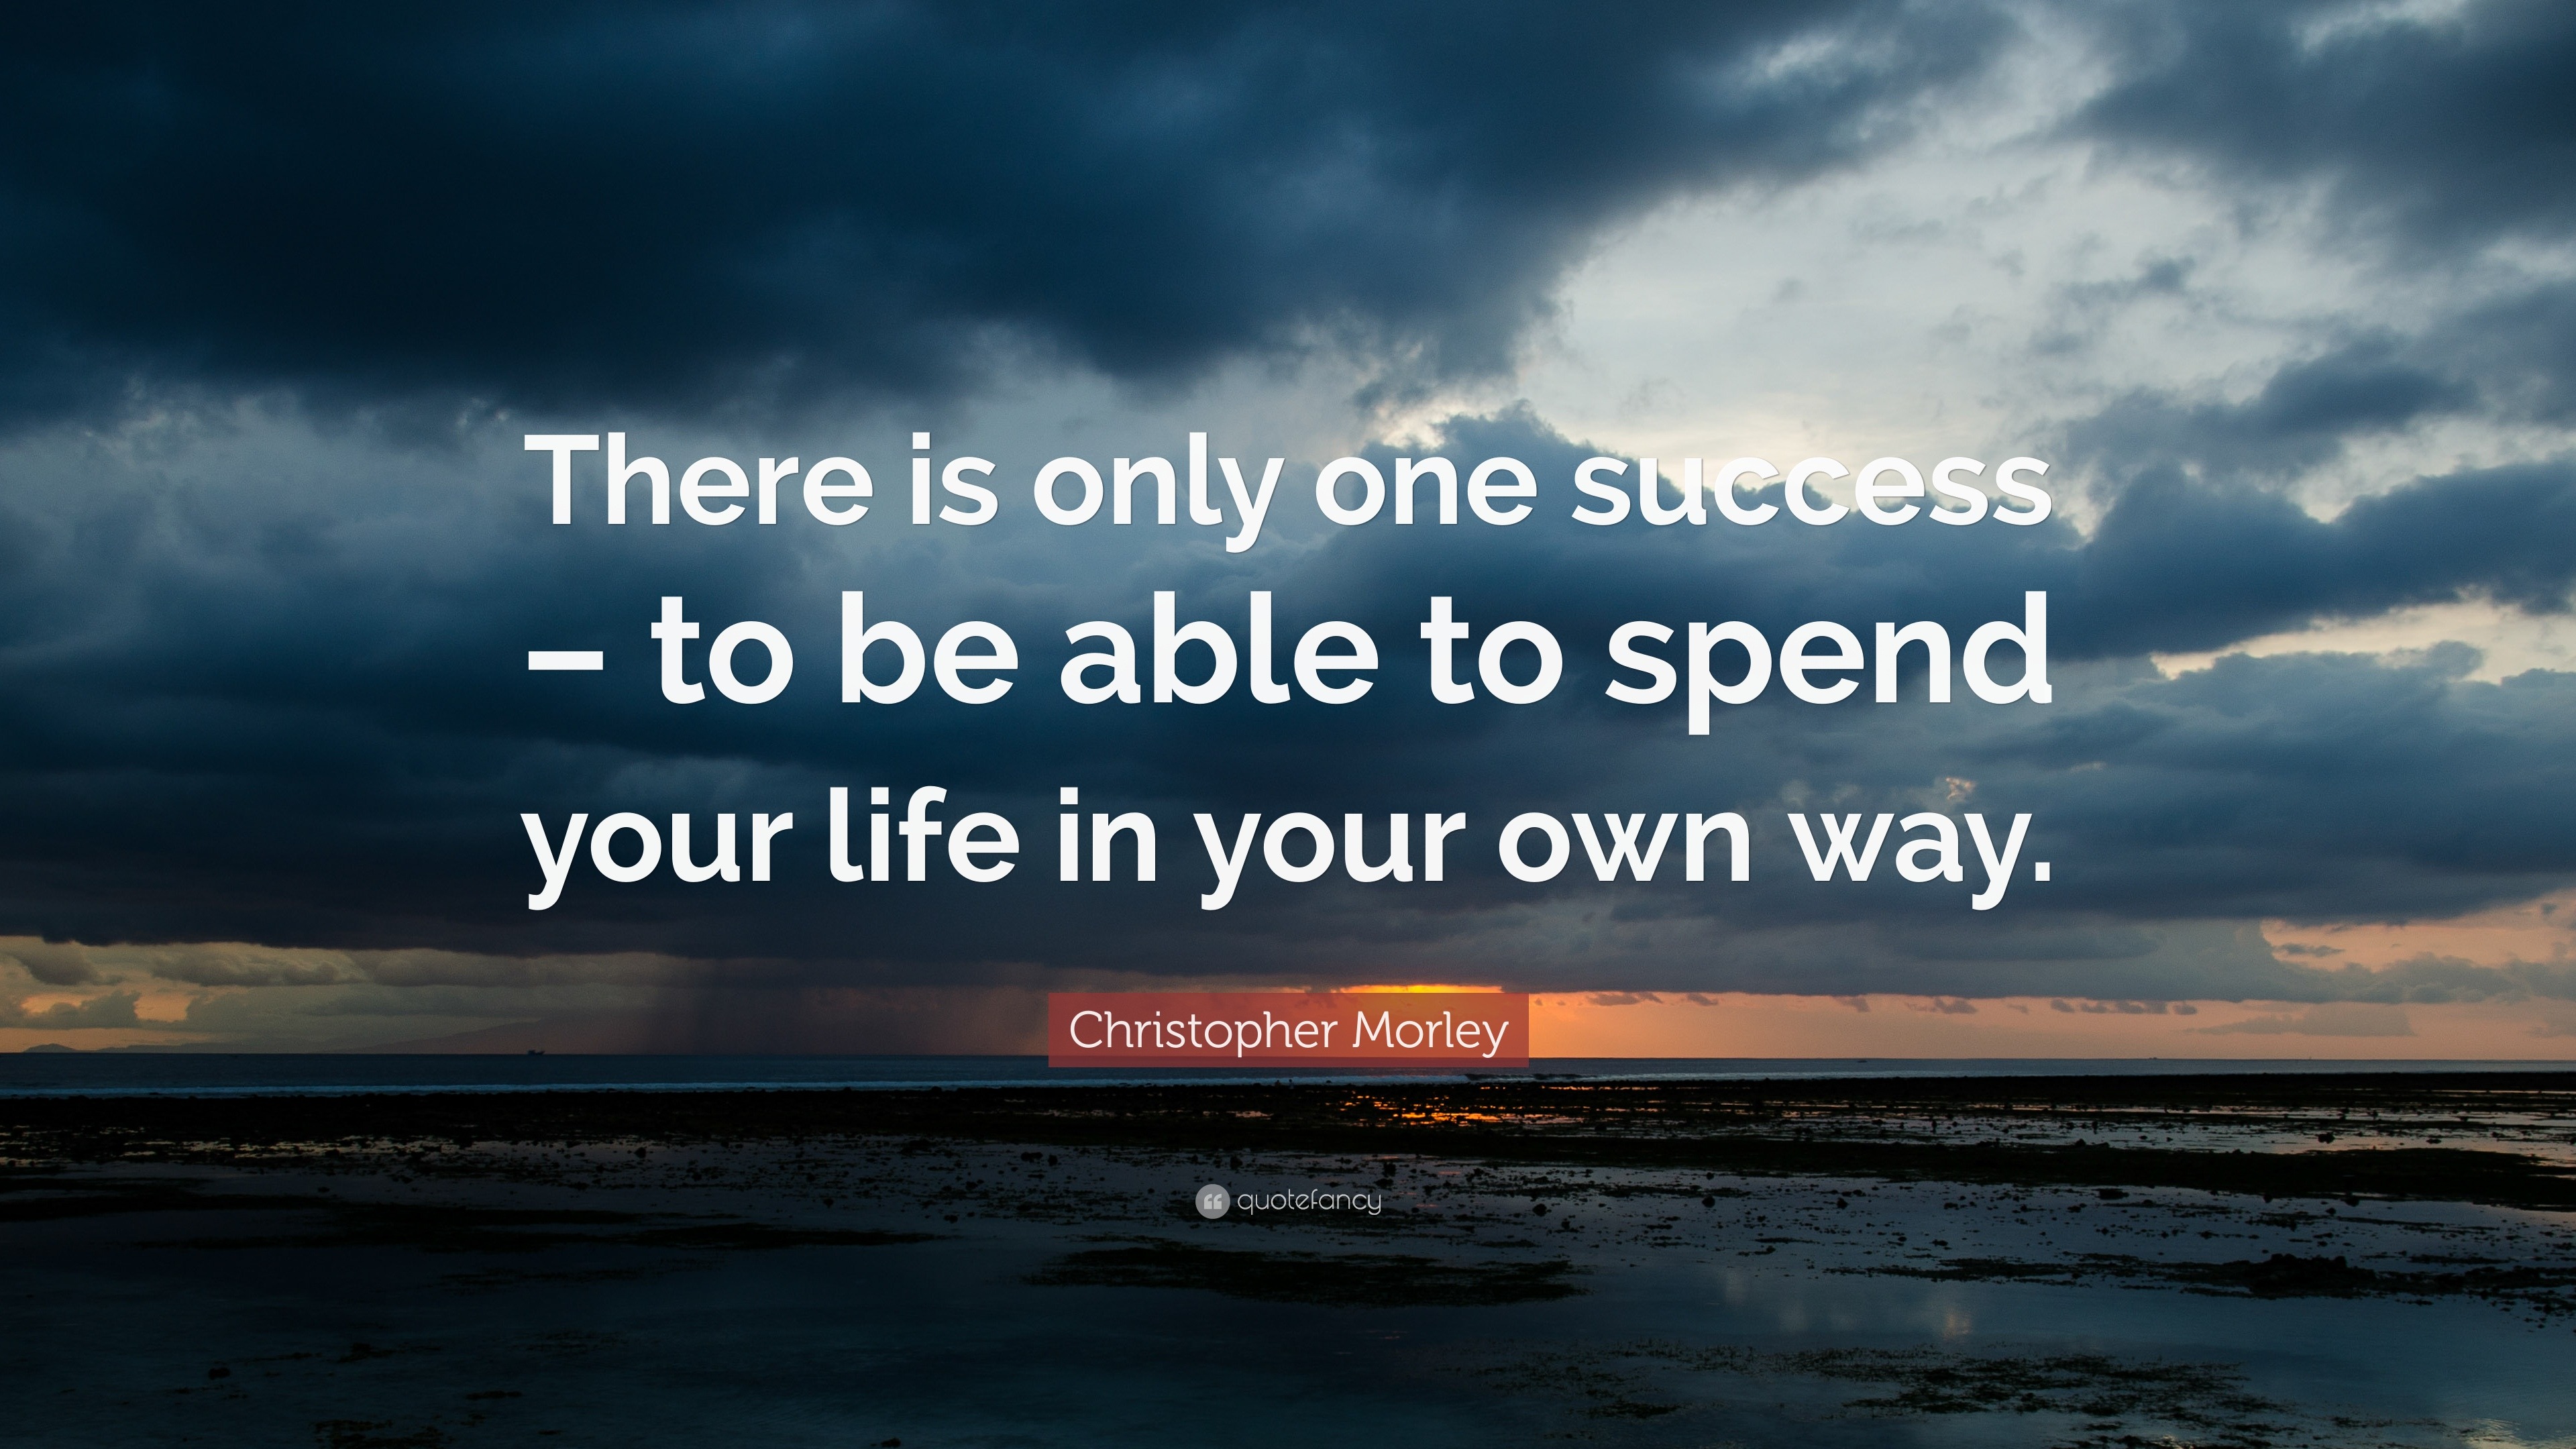 Christopher Morley Quote: "There is only one success - to ...